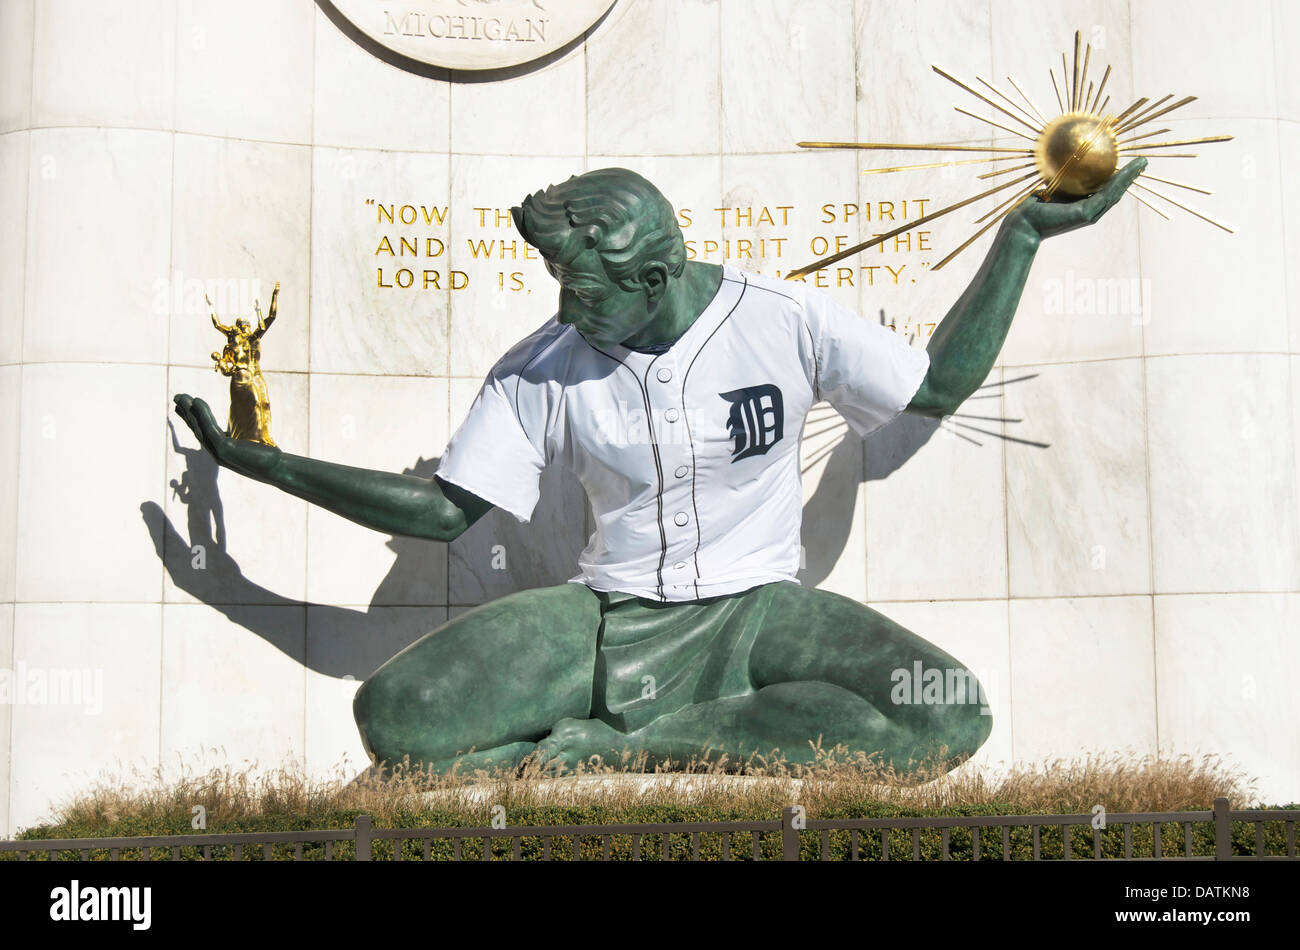 Spirit Of Detroit Statue with Detroit Tigers Baseball Jersey 2012, as the Detroit Tigers are competing for the World Series. Stock Photo